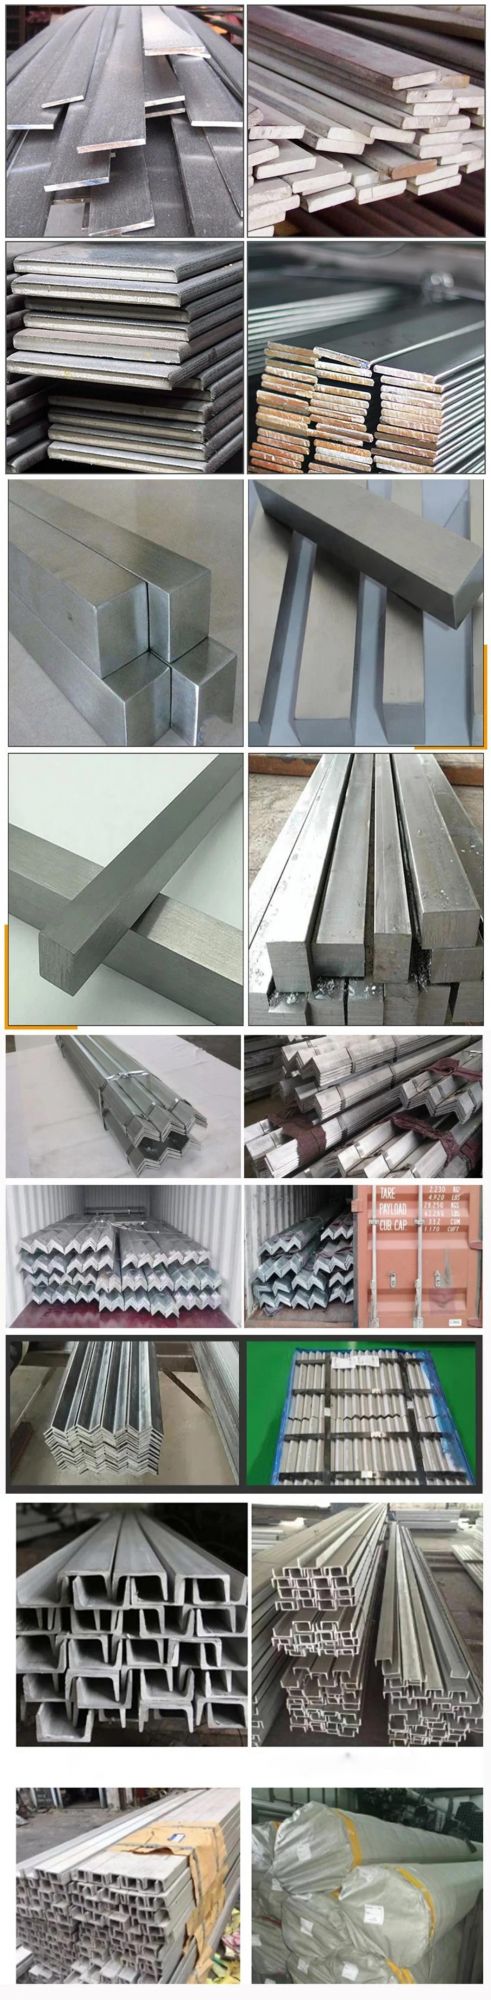 D2 Tool Steel Forged Steel Square Bar D2 /1.2379 / Cr12Mo1V1 Price Per Kgs